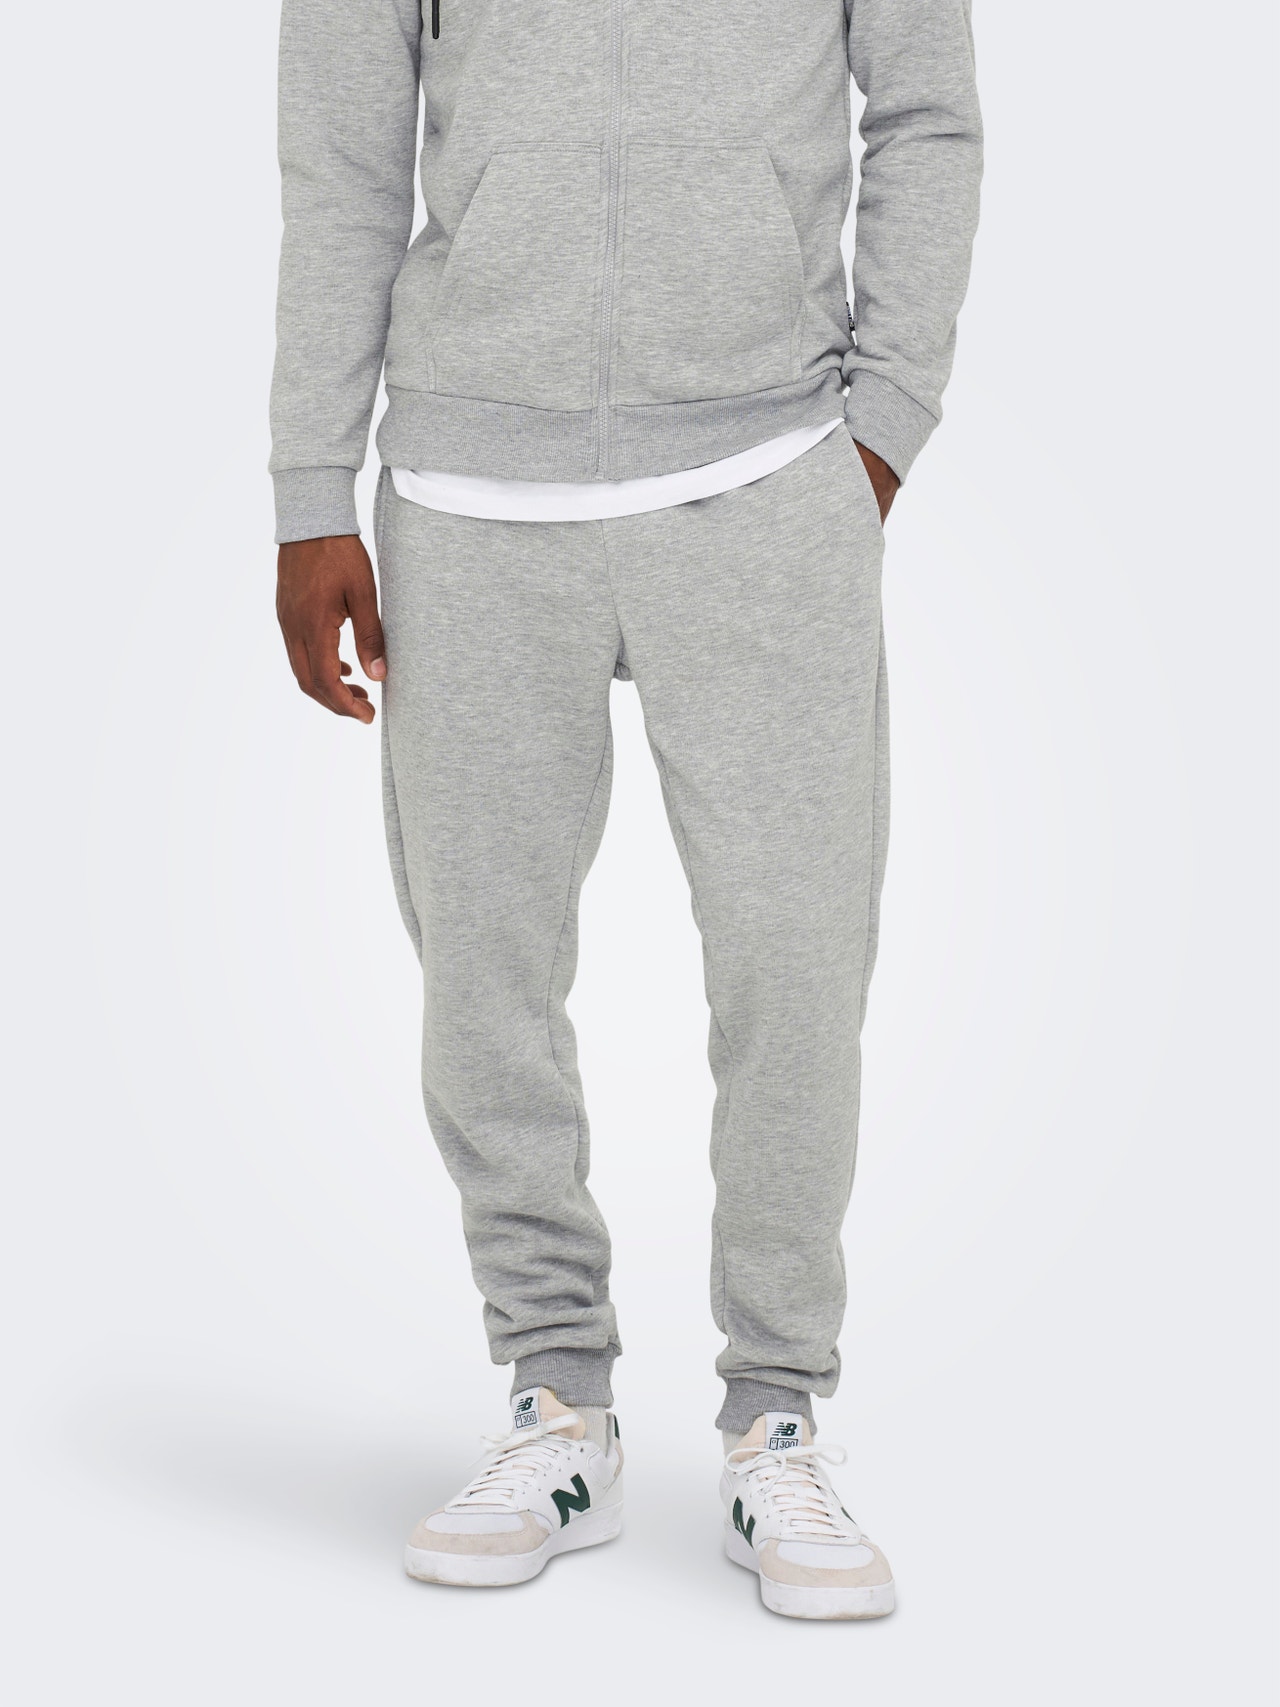 https://images.onlyandsons.com/22018686/3500995/003/onlysons-sweatpants-grey.jpg?v=d97e0d1129e954561c4a74c1620b8b01&format=webp&width=1280&quality=90&key=25-0-3